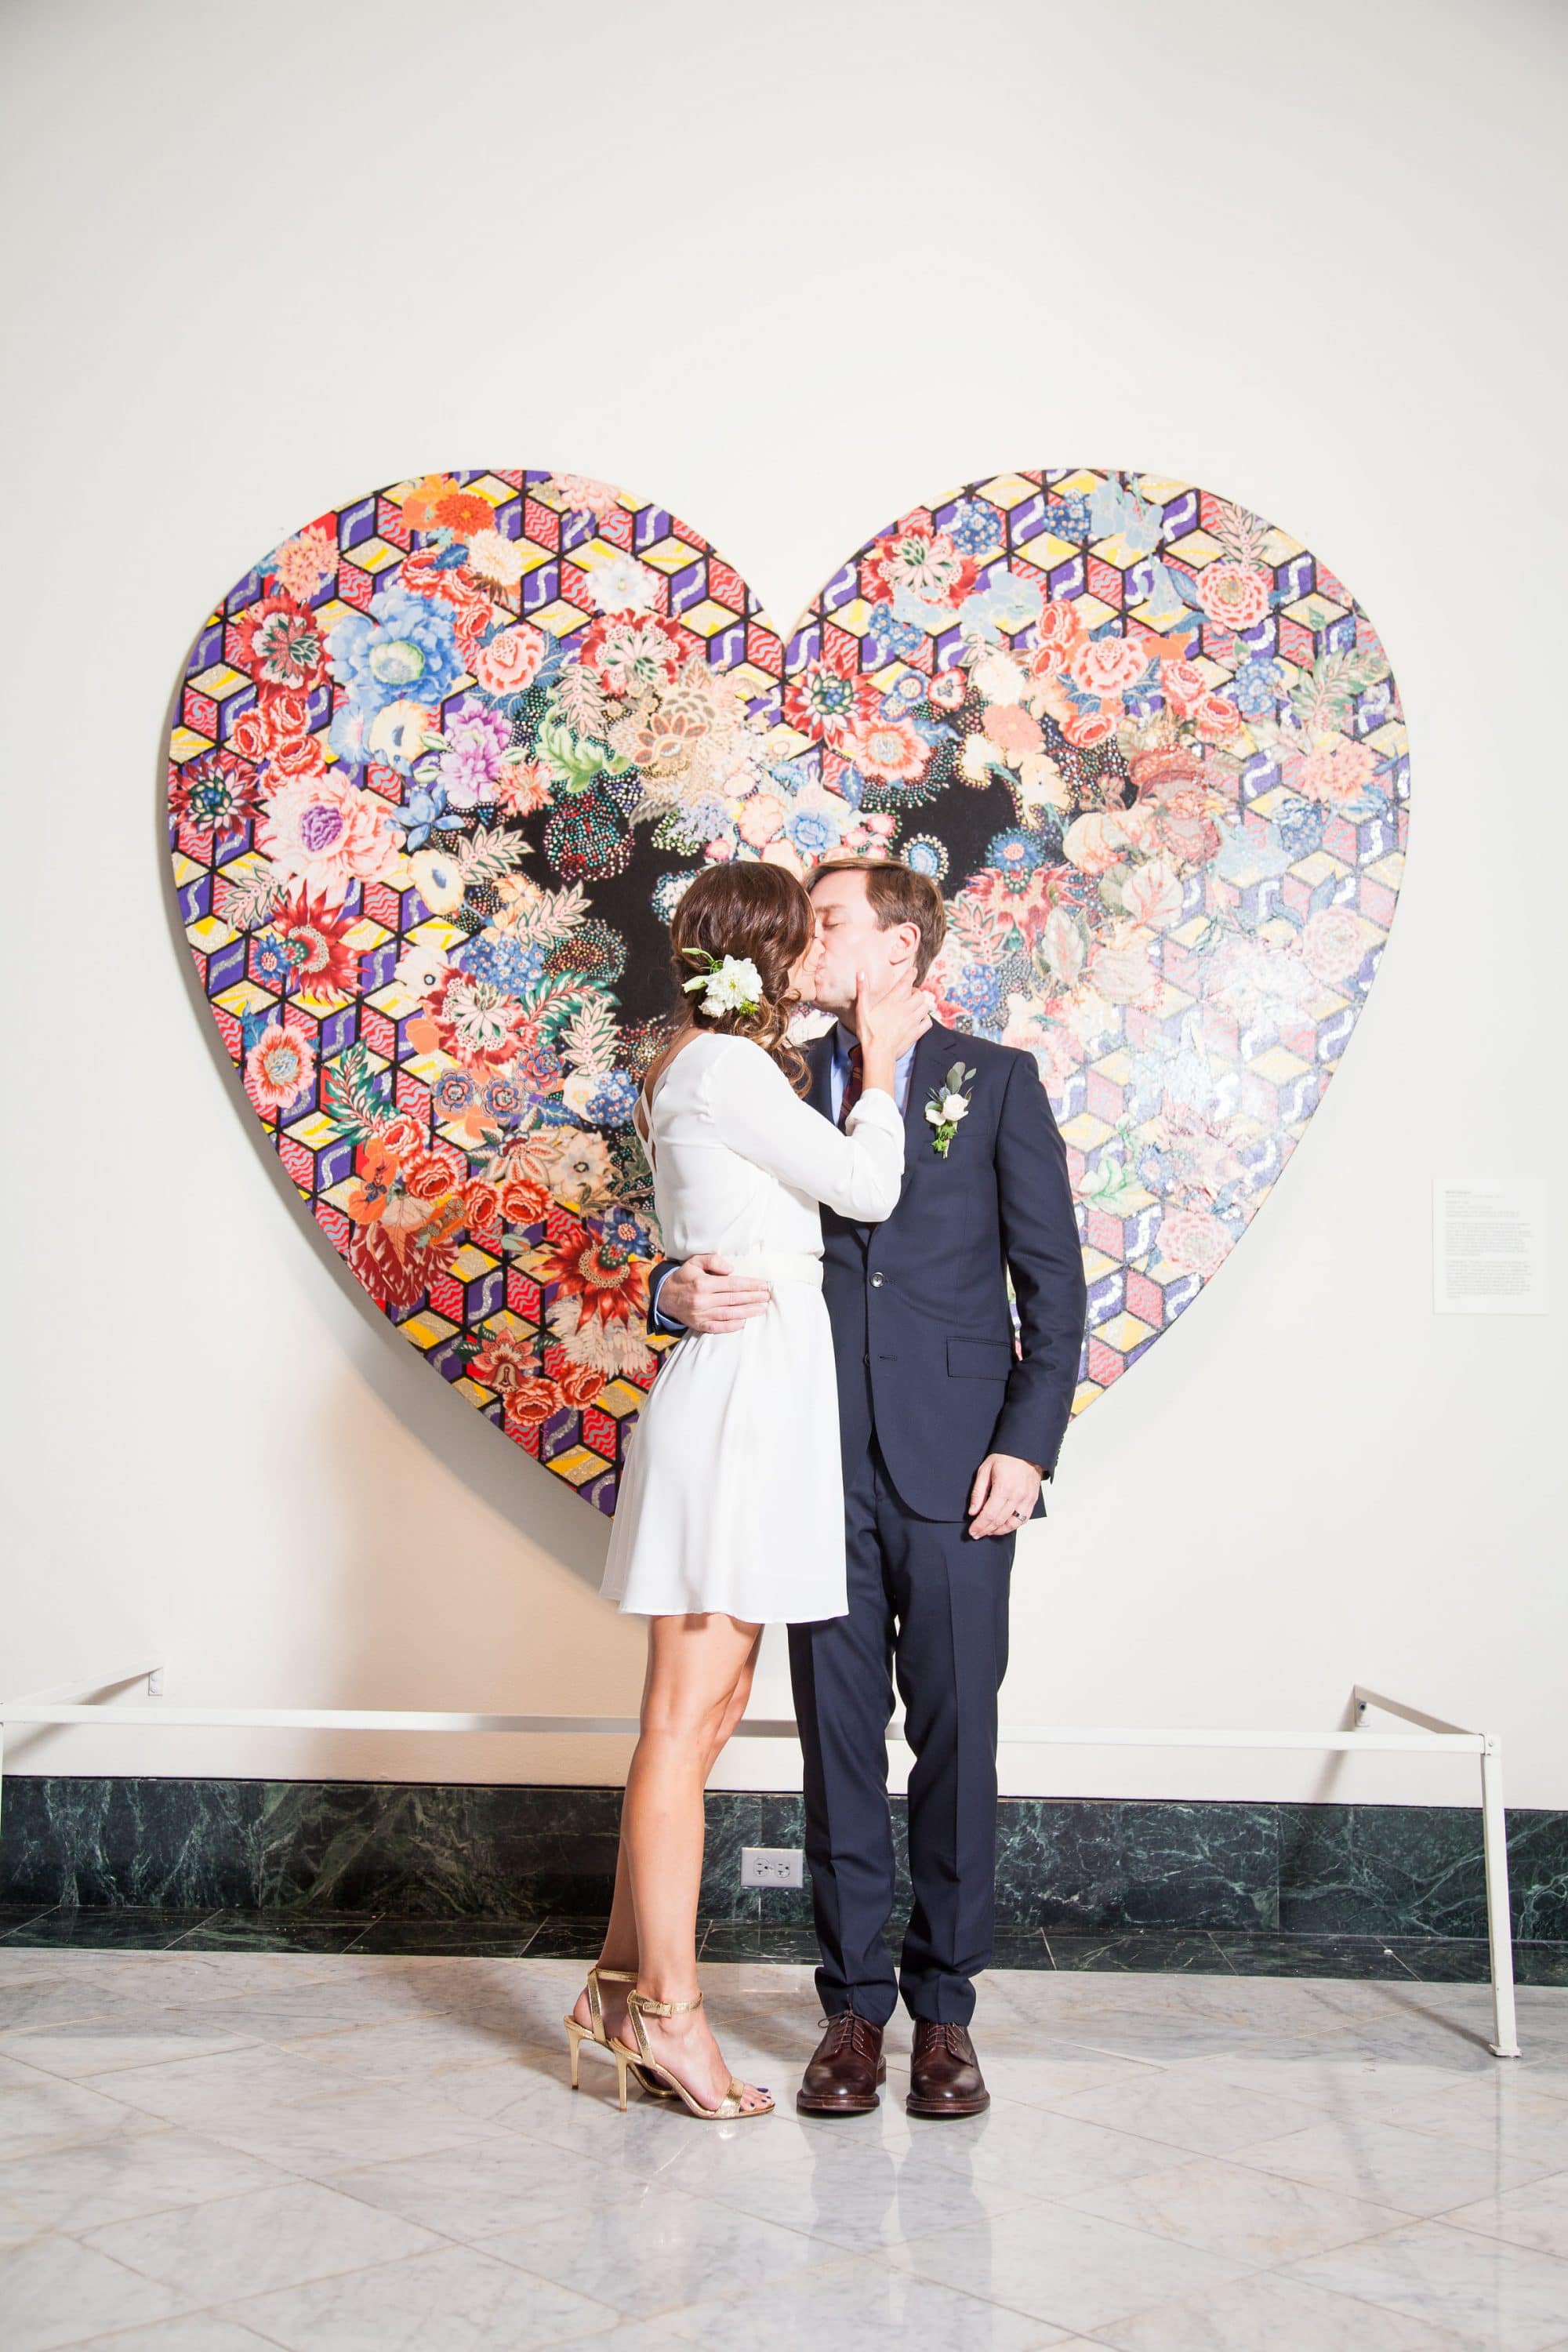 Orlando Museum of Art - bride and groom kissing in front of heart-shaped artwork